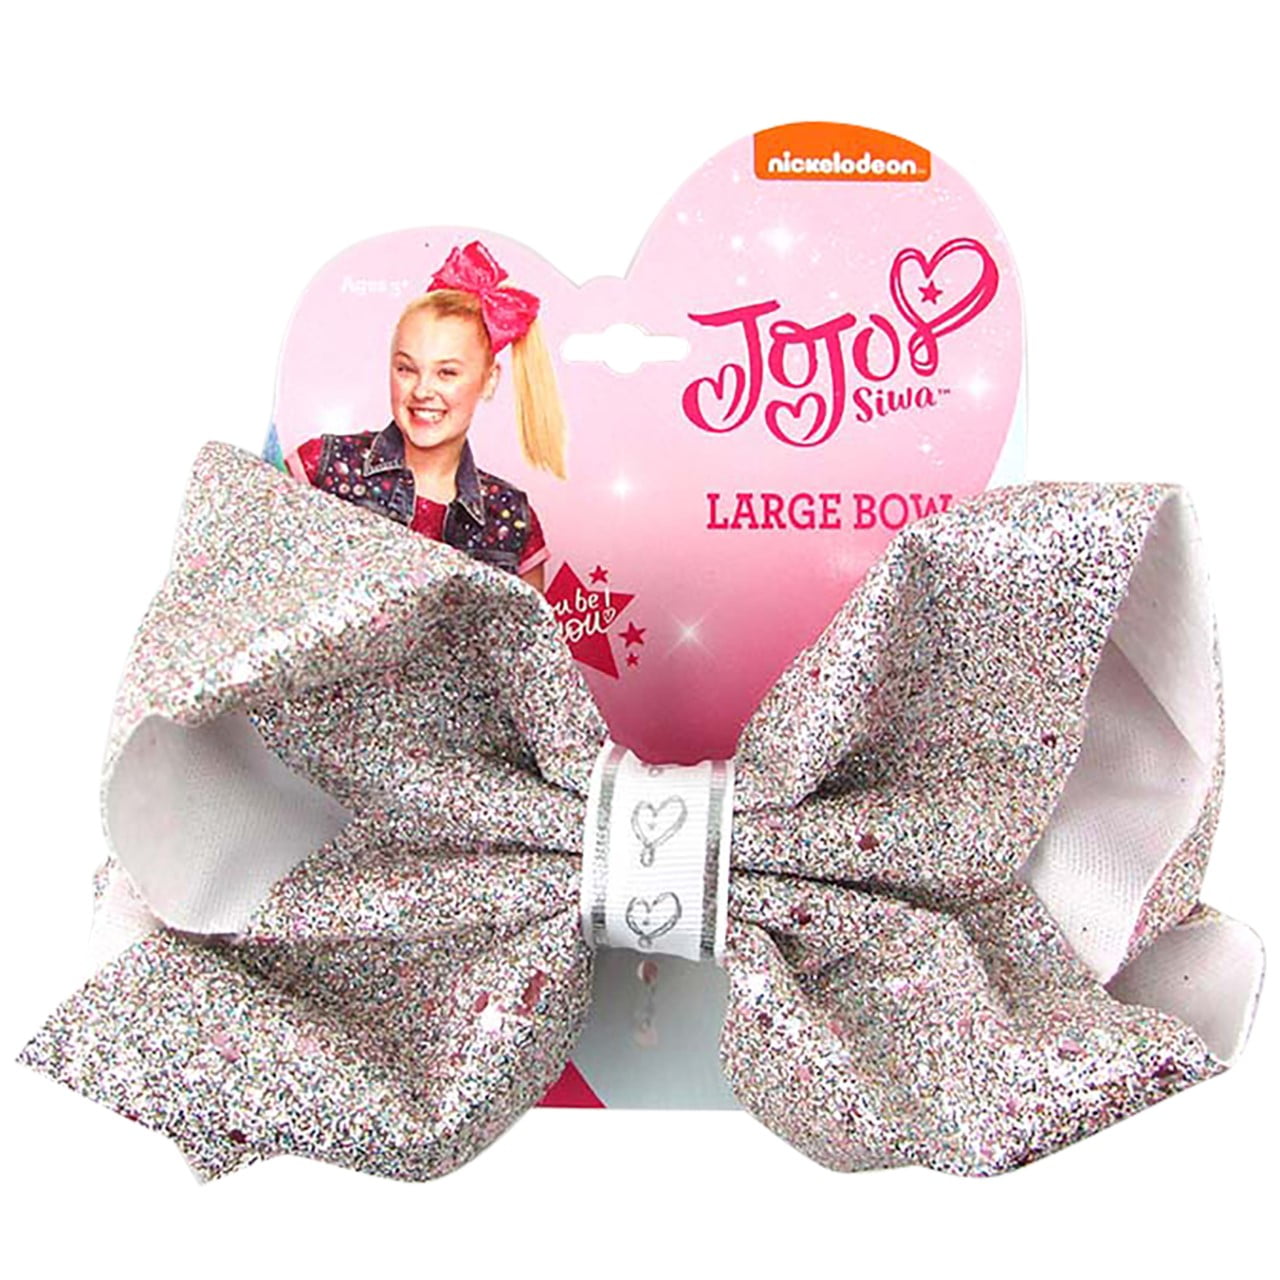 Details about   NICKELODEON JOJO SIWA HUGE BIG SIGNATURE HAIR BOW BNIP COLOR SEQUIN SPARKLE 21 